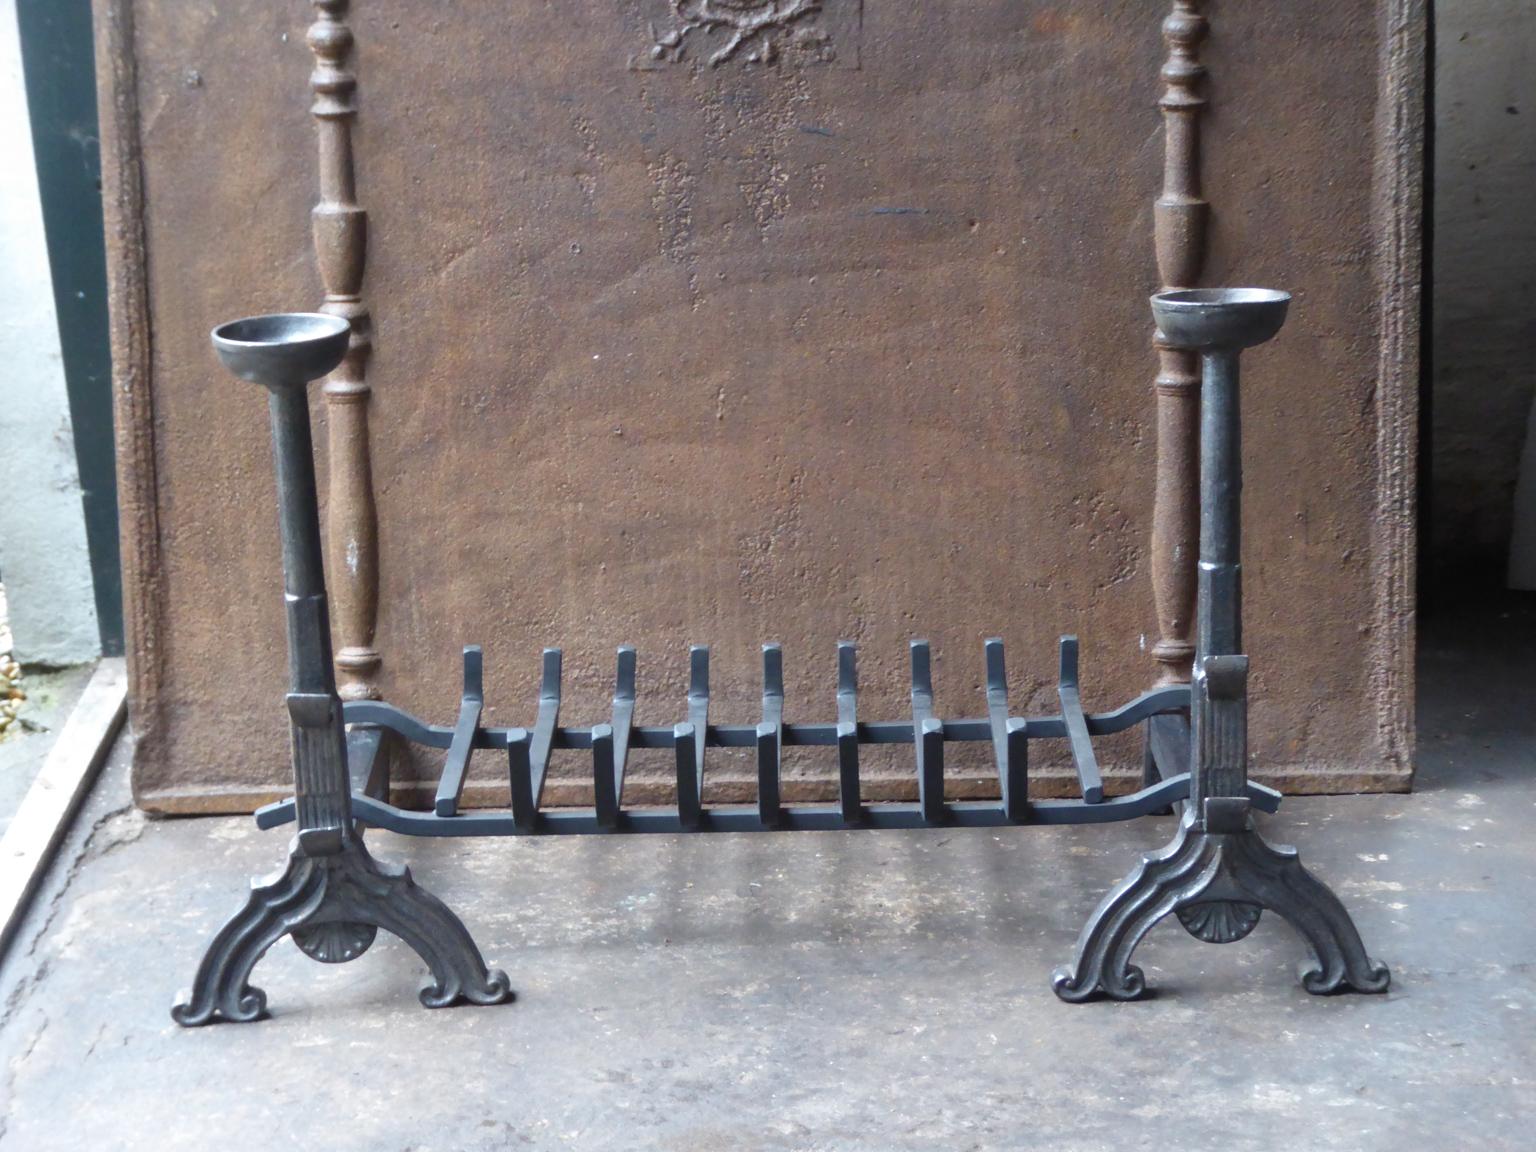 English neo gothic fireplace style basket or fire basket. The fireplace grate is made of cast iron and wrought iron. The total width of the front of the fireplace grate is 37.4 inch (95 cm).

















